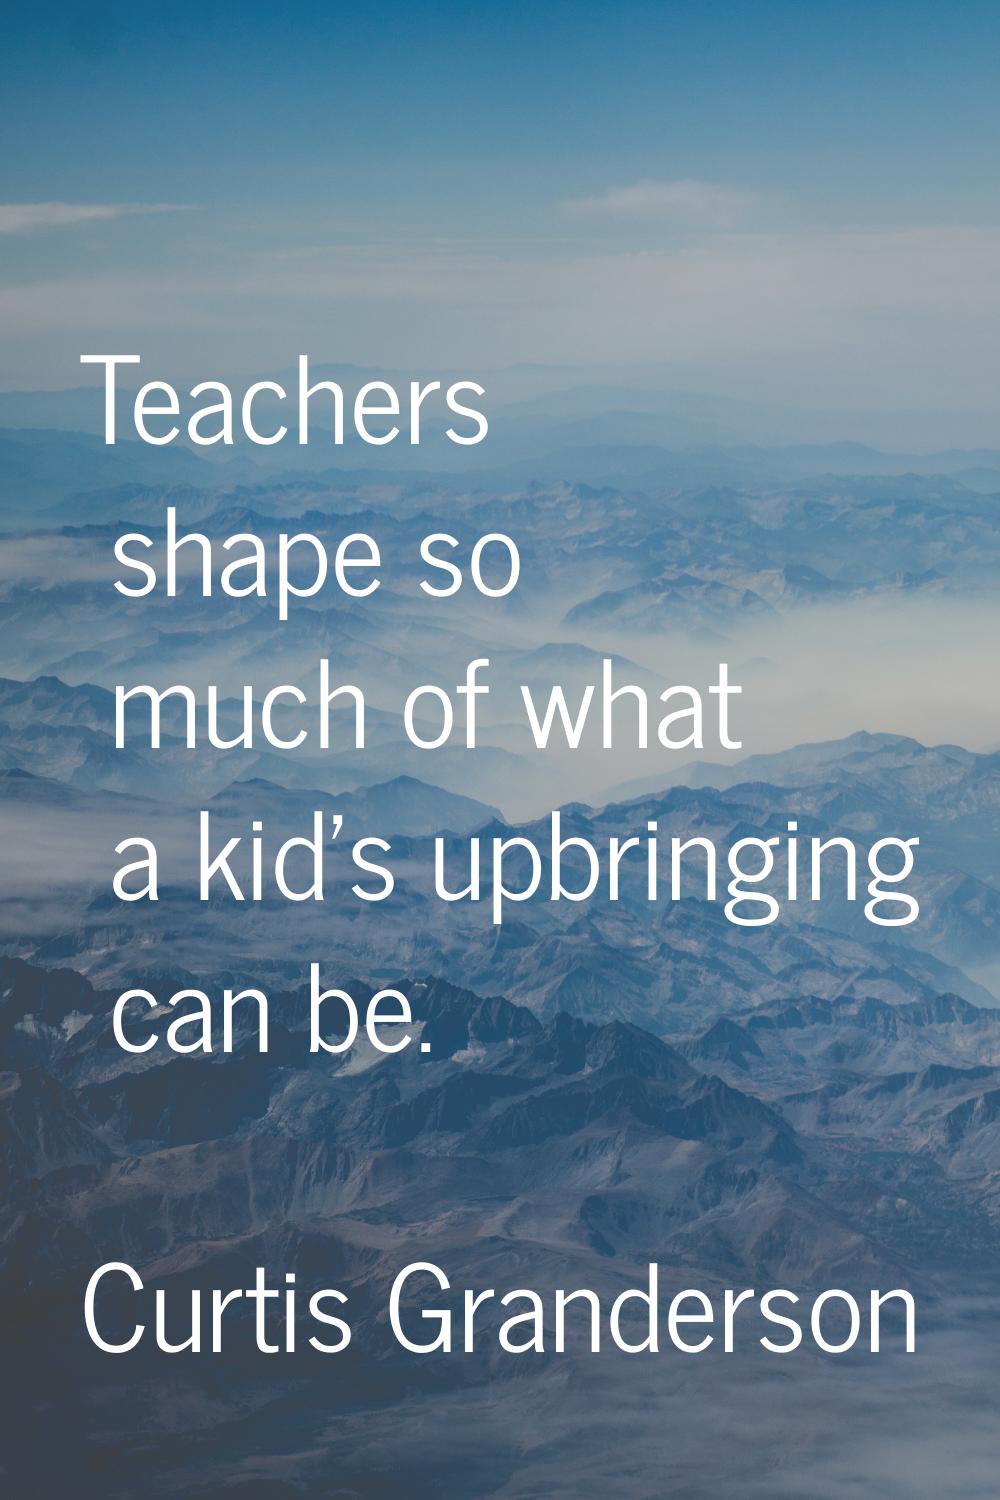 Teachers shape so much of what a kid's upbringing can be.